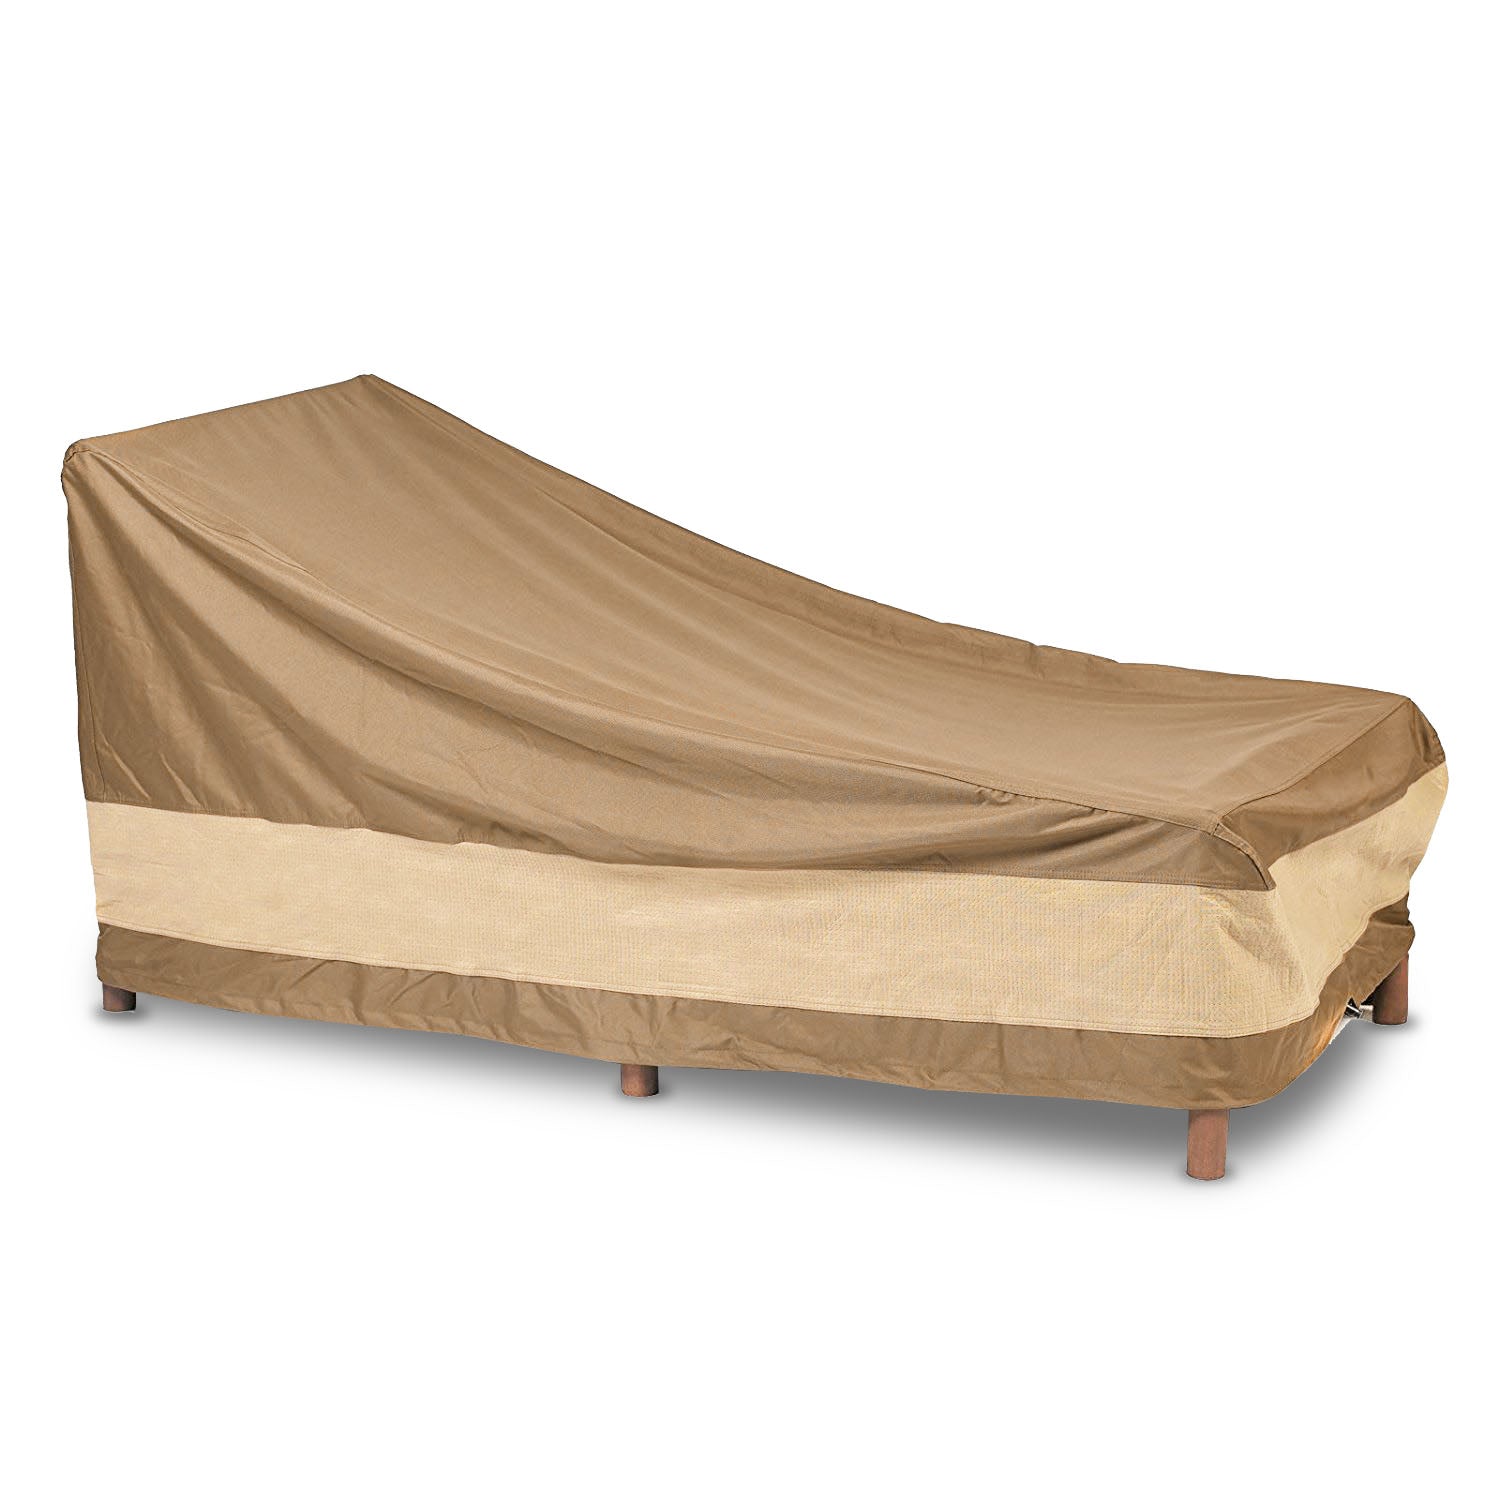 ANYWEATHER Waterproof Patio Chaise Lounge Outdoor Cover for Rain, Snow, and Debris, Brown